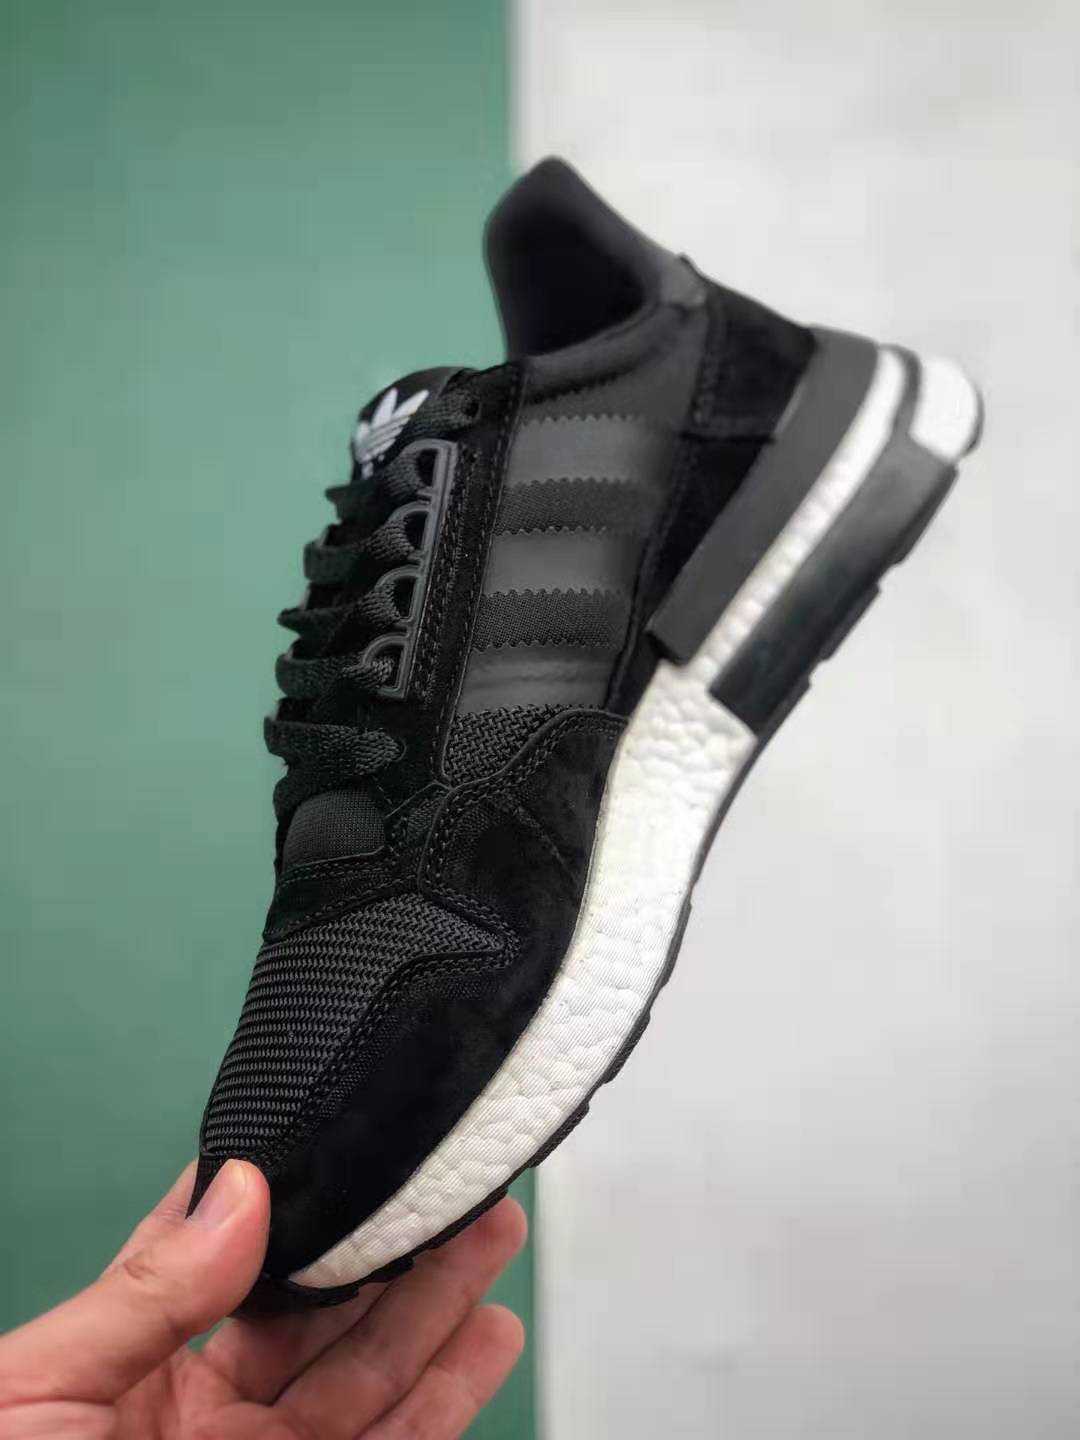 Adidas ZX 500 RM Core Black B42227 - Latest Release and Unbeatable Style